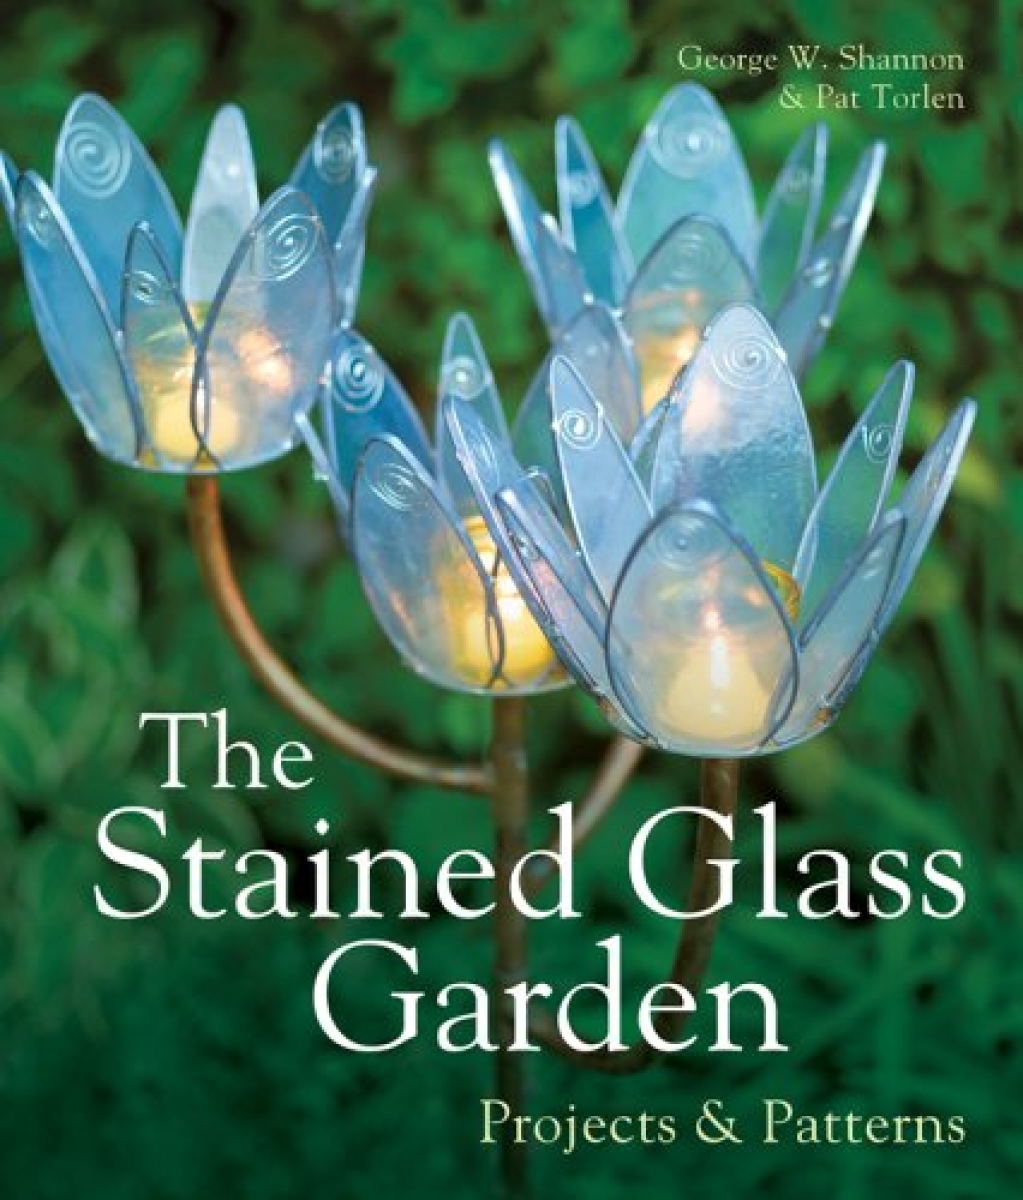 George W.S. The Stained Glass Garden: Projects & Patterns 